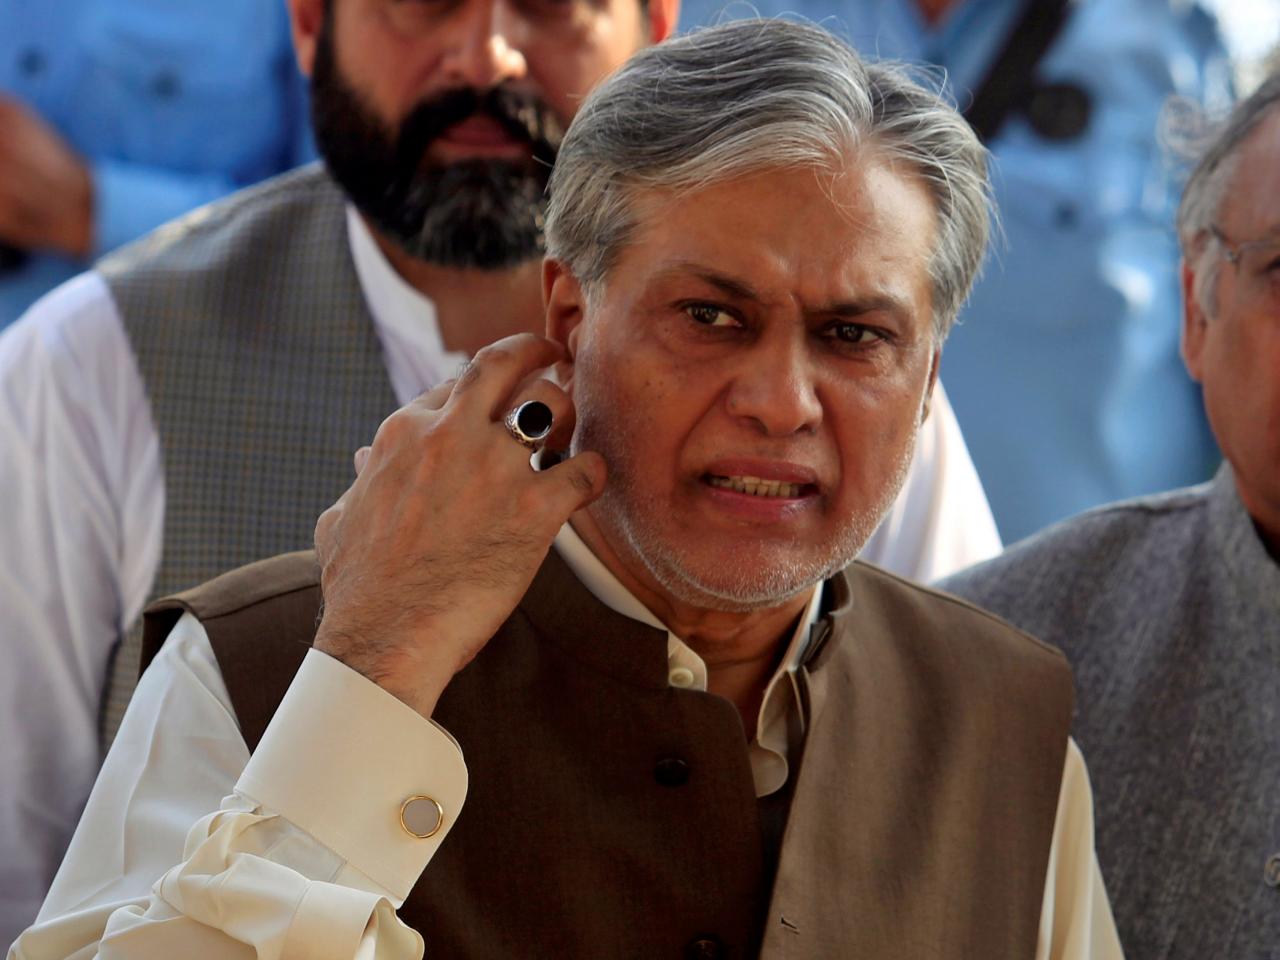 pakistans-finance-minister-ishaq-dar-is-seen-after-a-party-meeting-in-islamabad-2-2-2-2-2-3-4-2-2-3-2-2-2-3